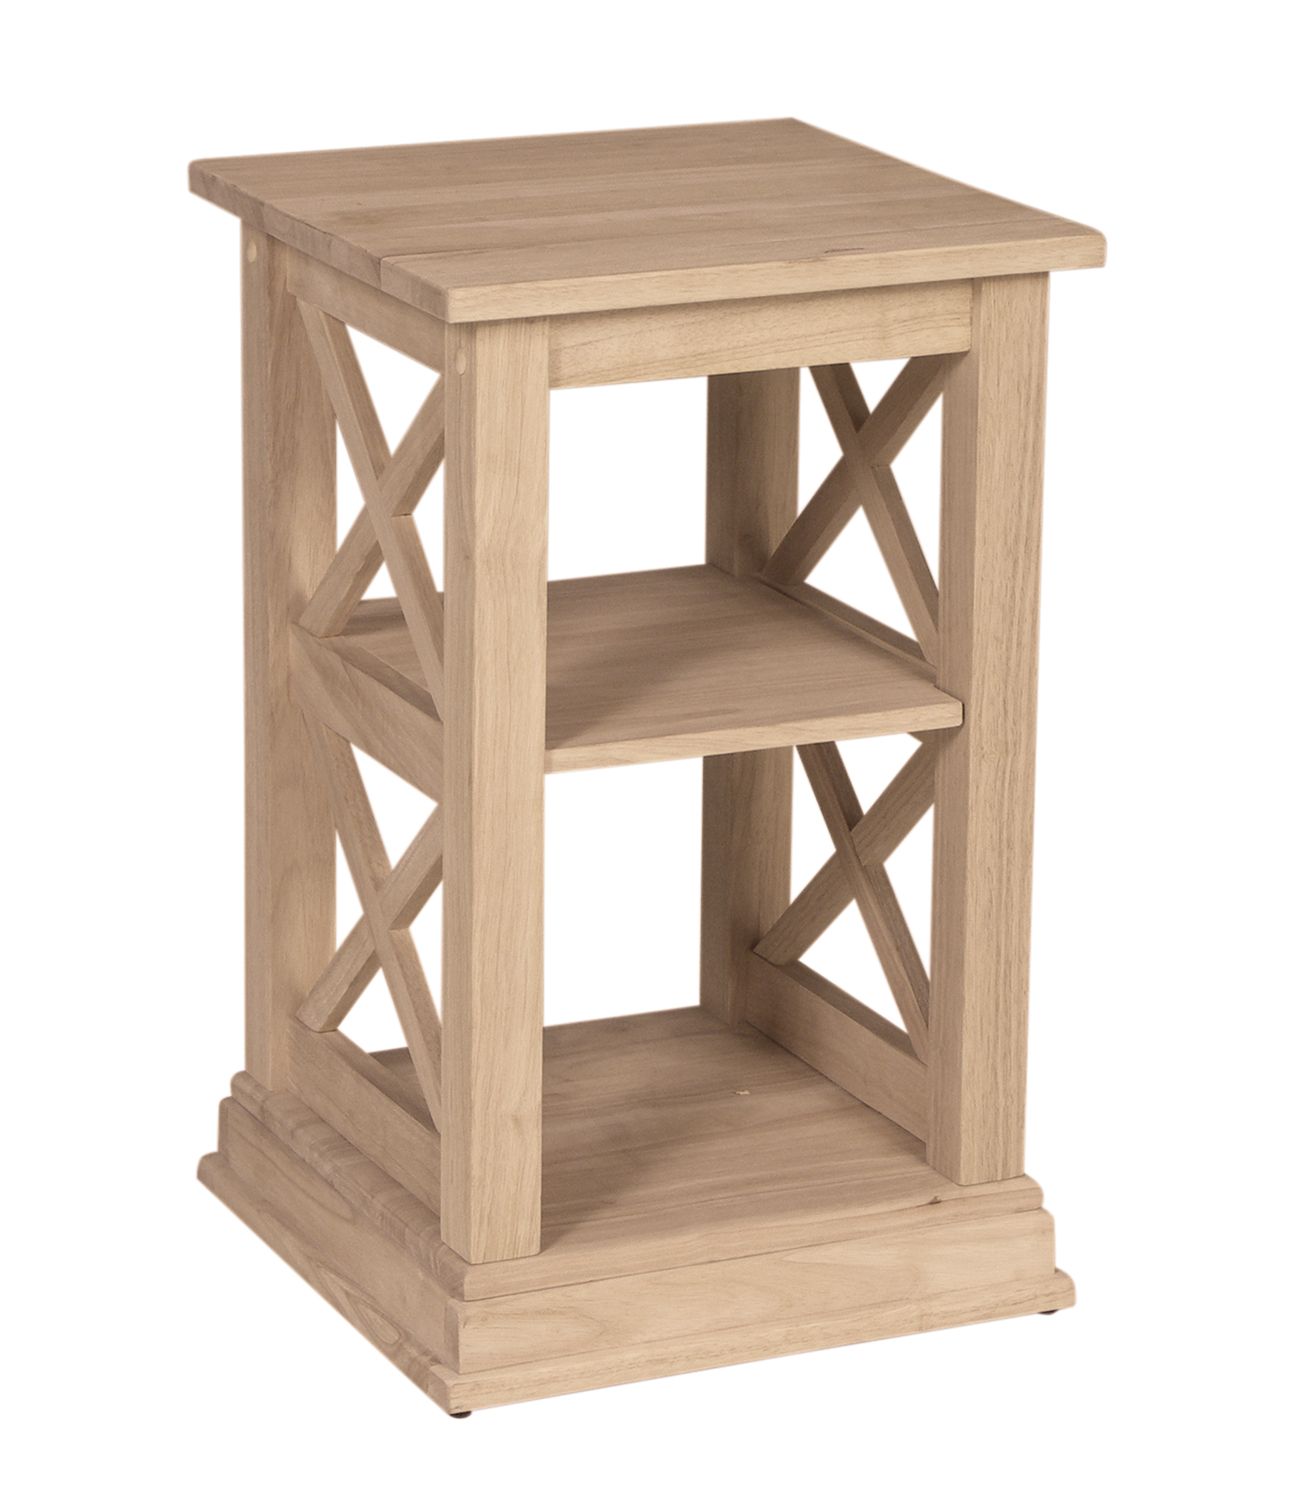 solid wood accent table update your home with natural oak tables furnishings naturalwoodfurnishings solidwoodfurniture diy customfurniture sheesham nautical themed gifts retro